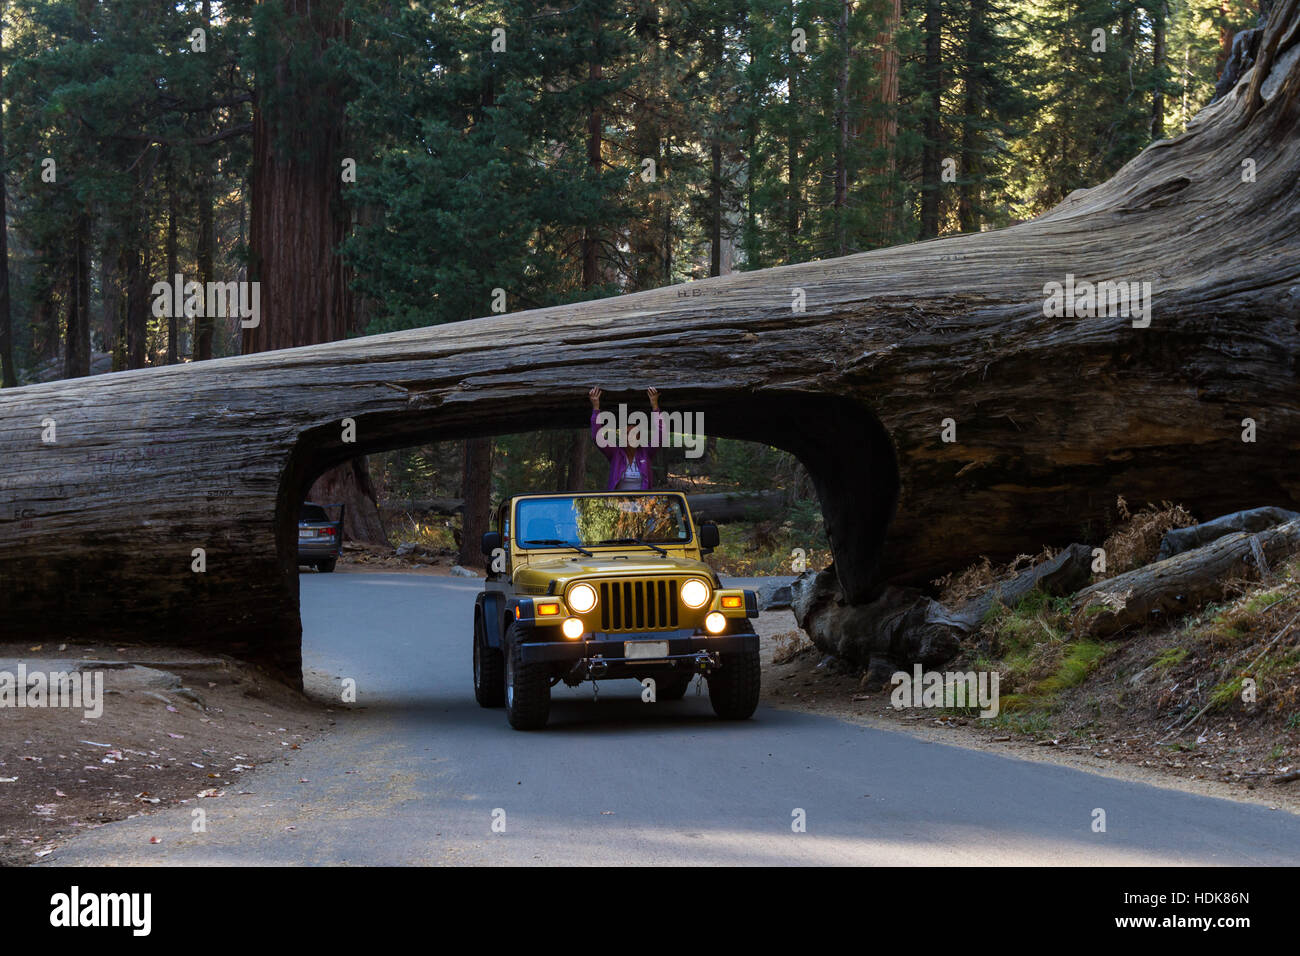 Sequoia NP, California - November 14: Gold jeep going thru a tunnel cut out of a single Sequoia tree trunk. November 14 2016, Sequoia NP, California. Stock Photo